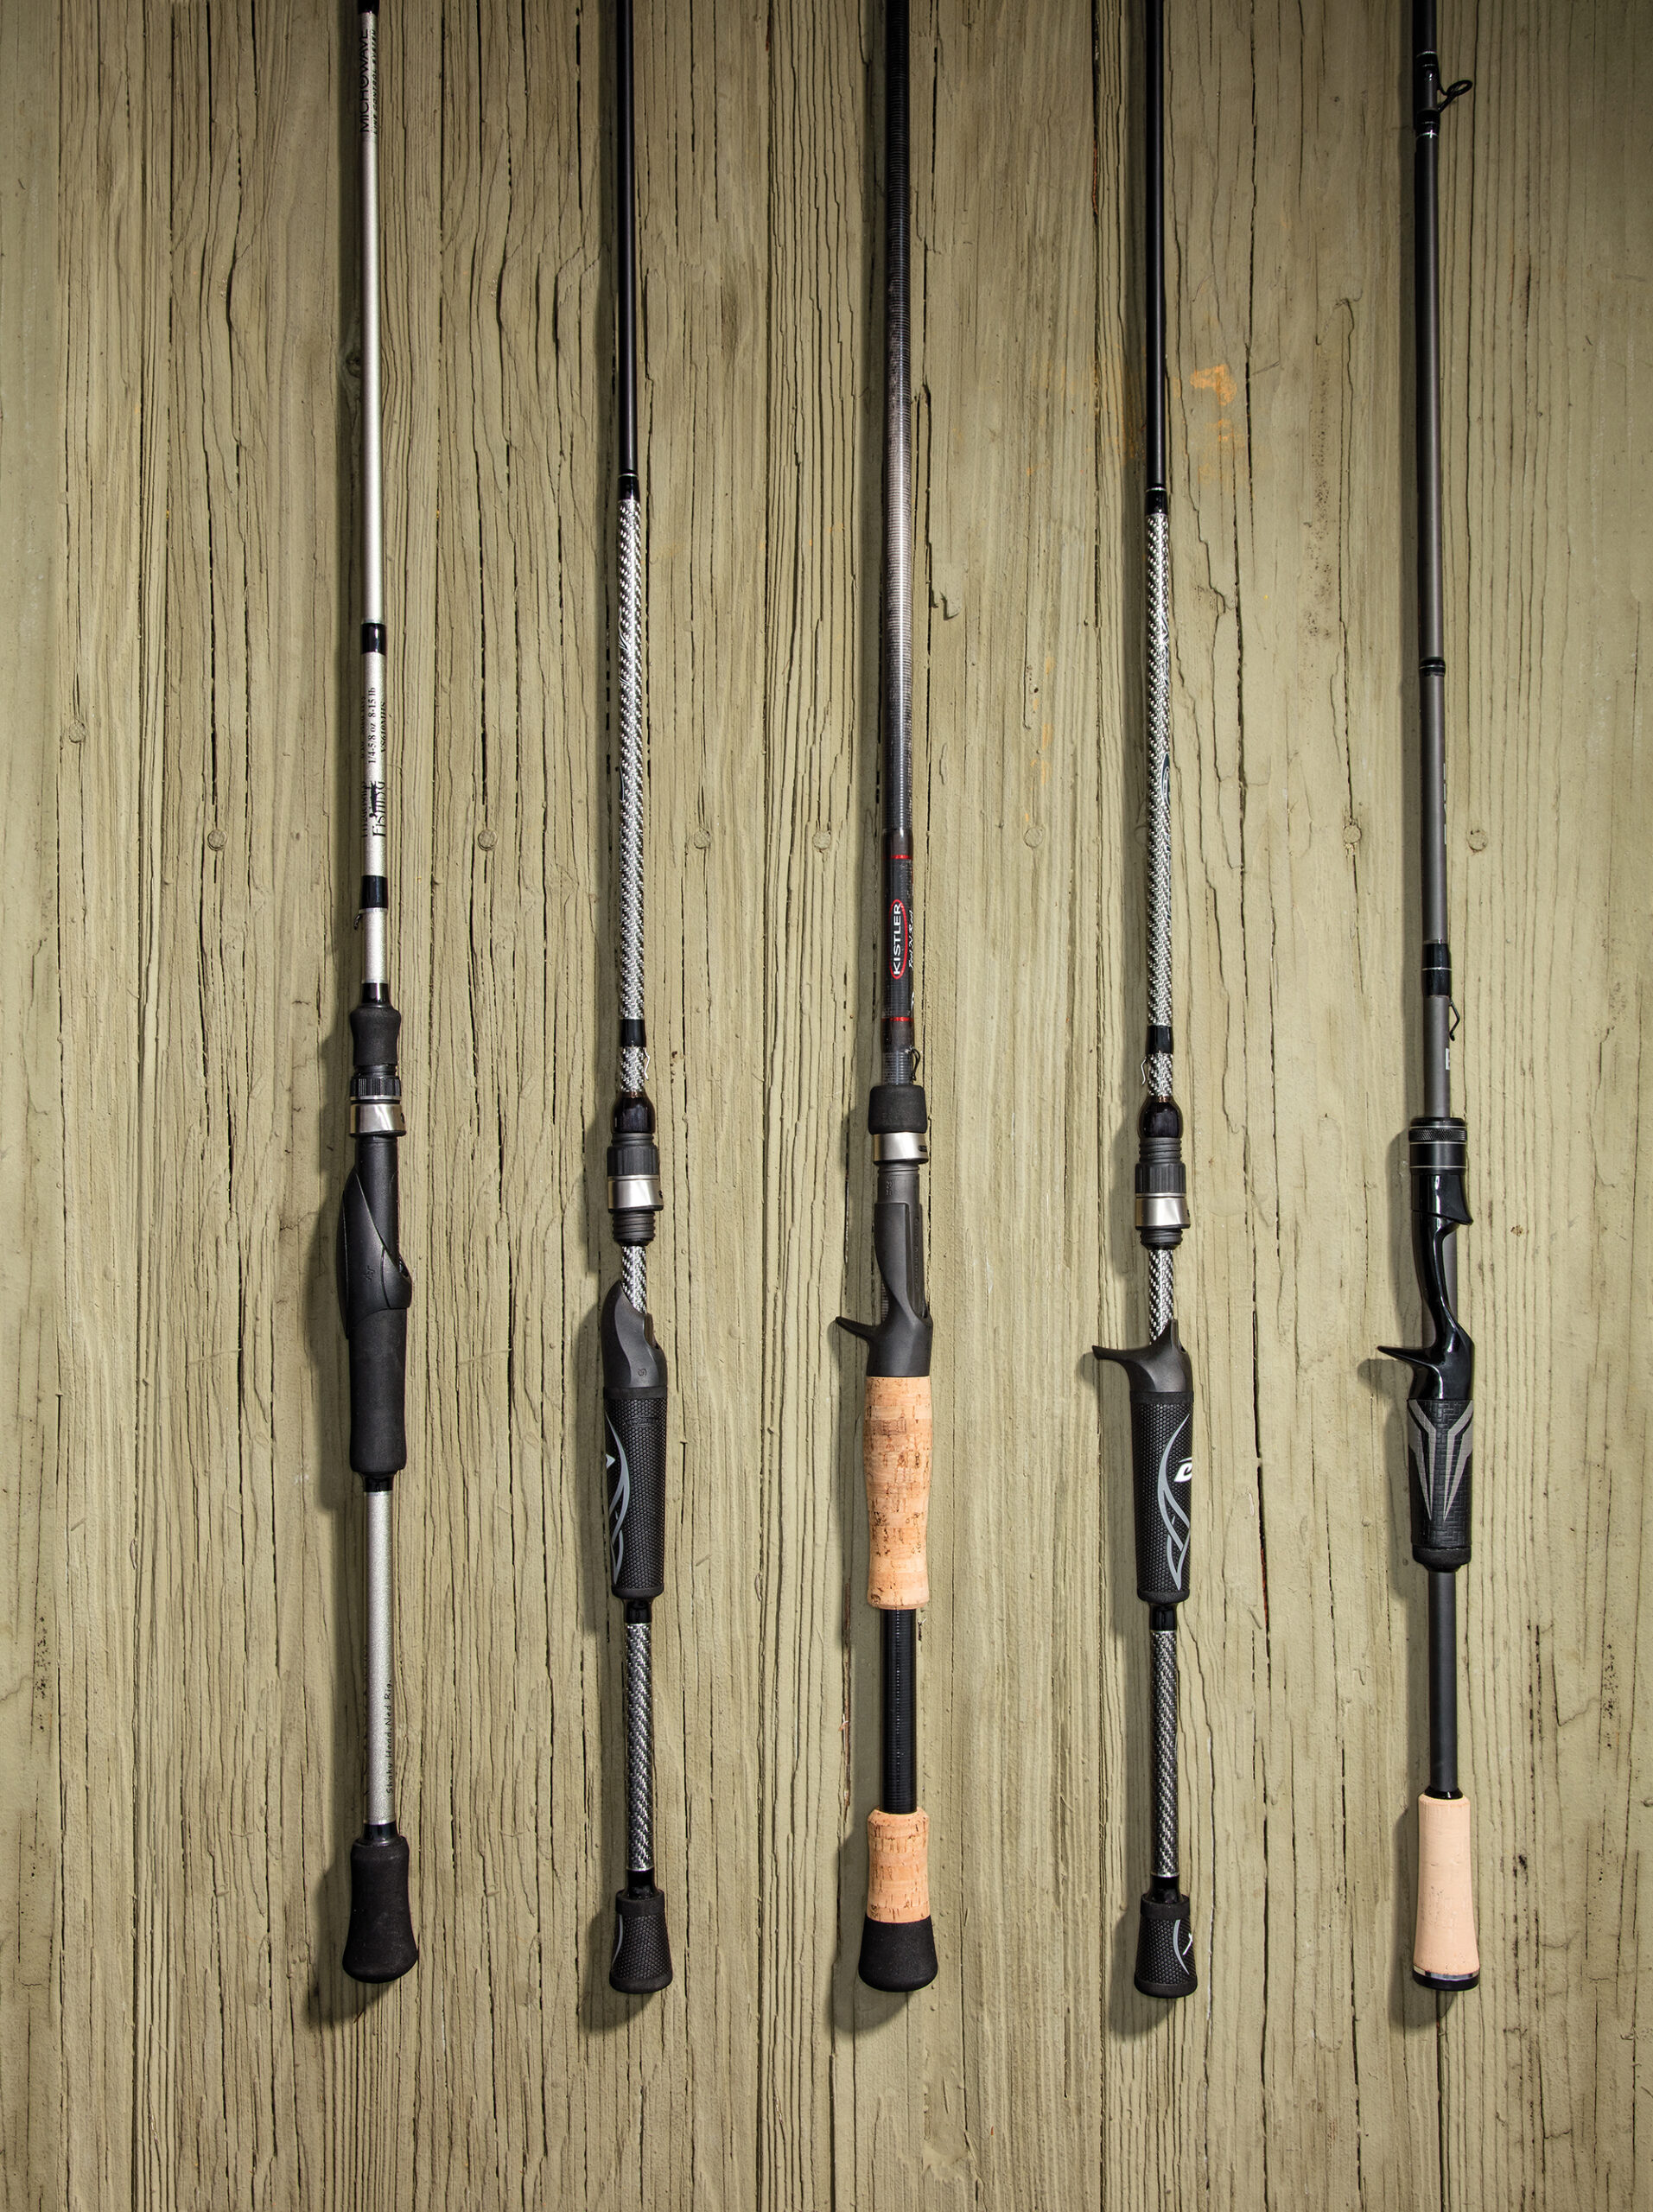 Top fishing rods